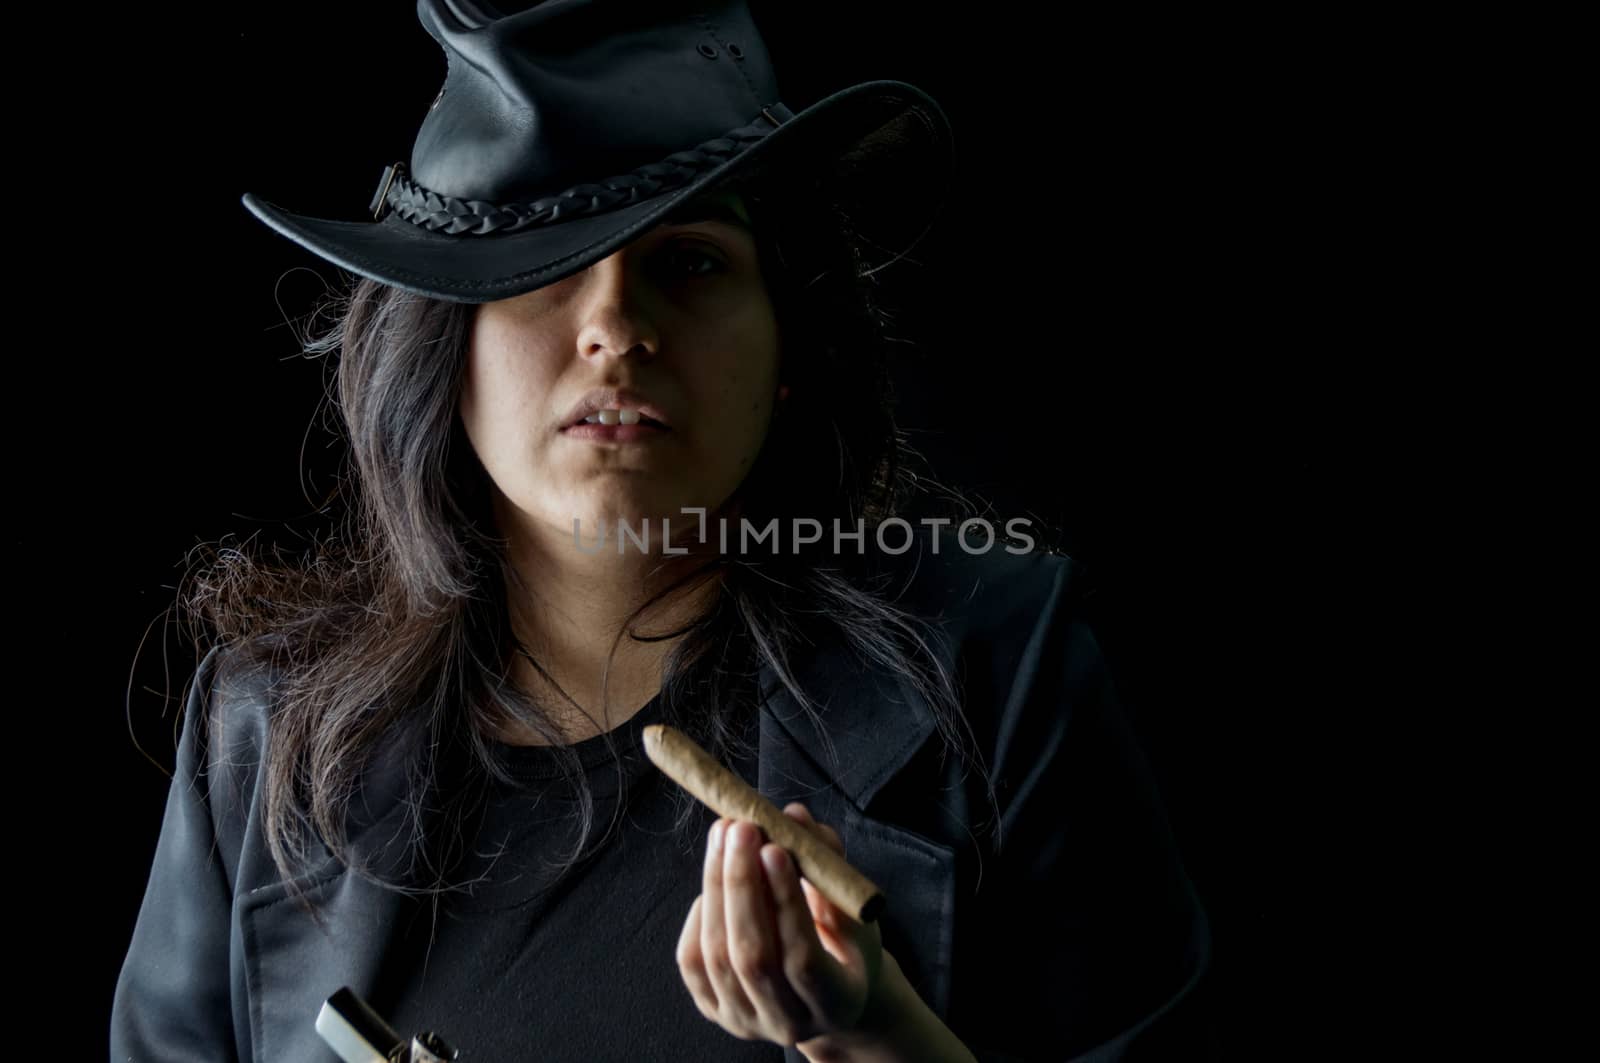 Young girl with a cigar in her mouth wearing black leather jacket and hat and looking at the camera